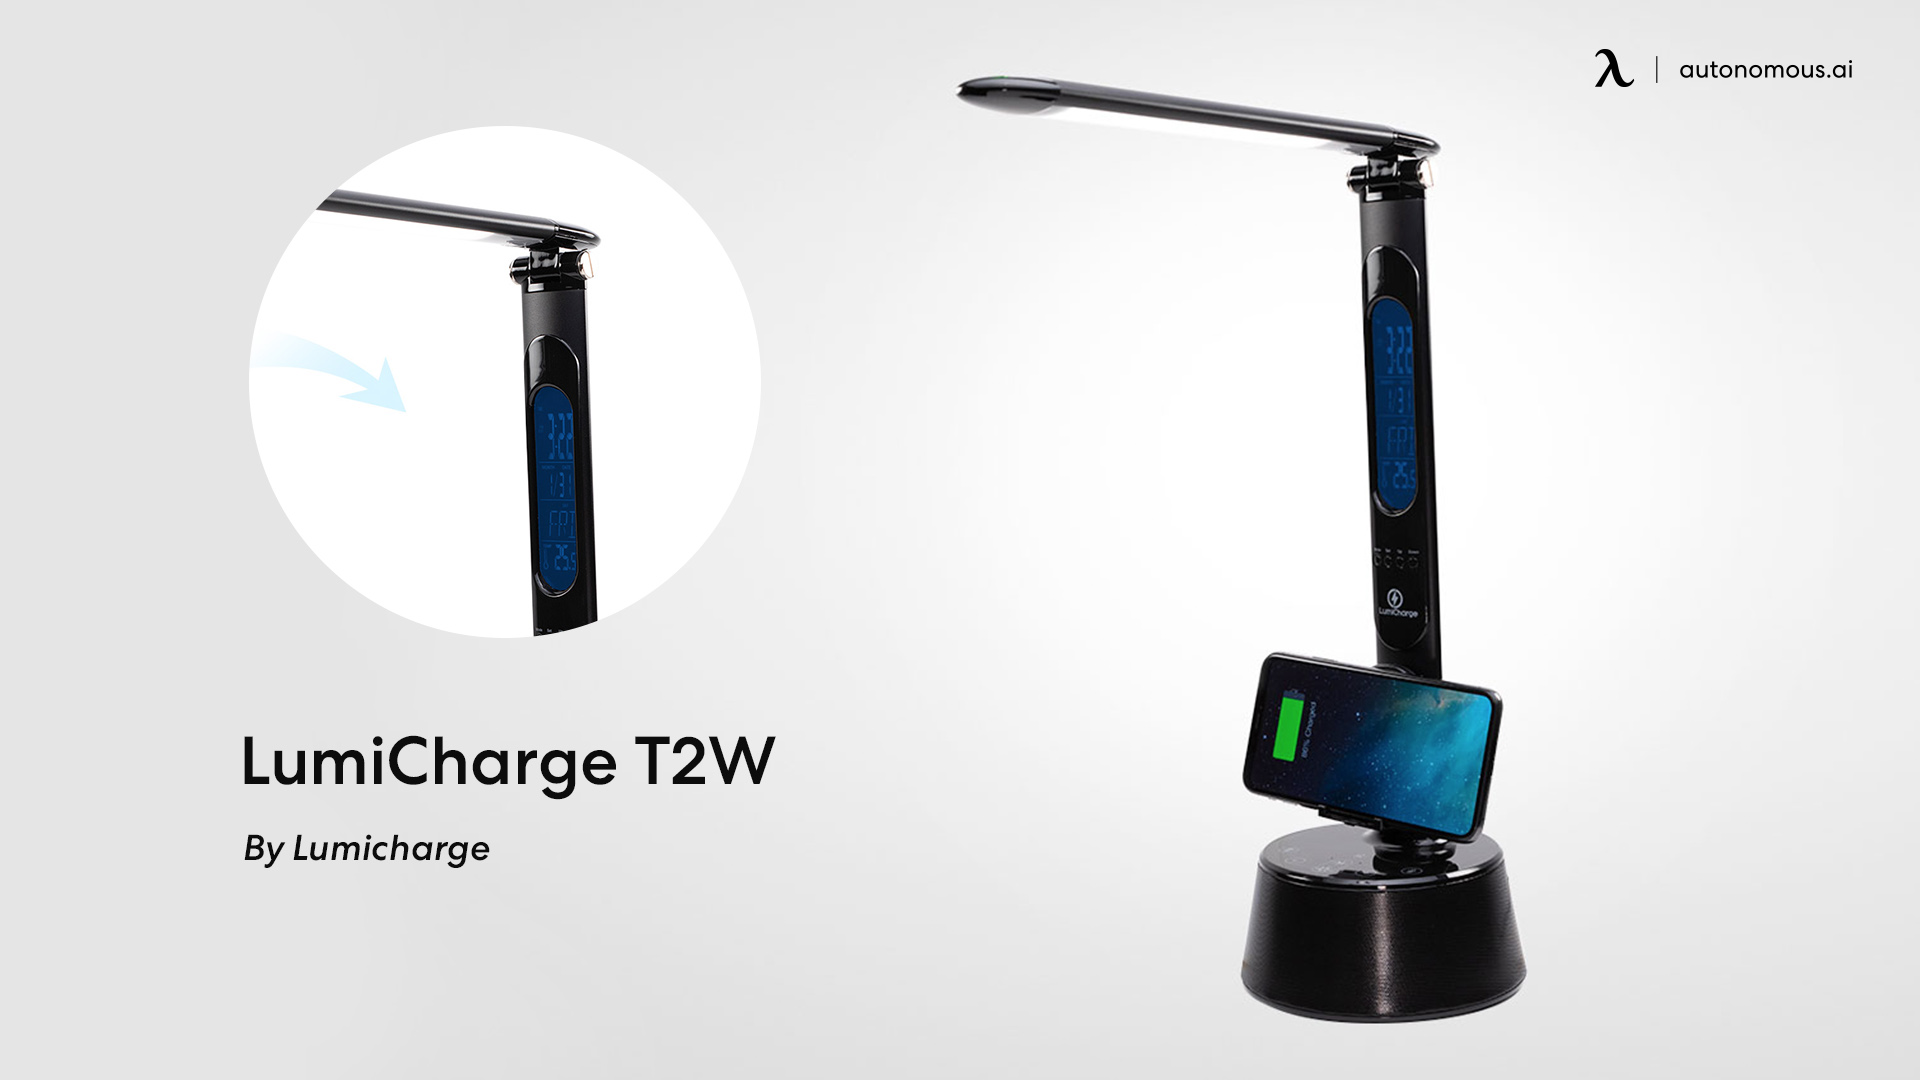 LumiCharge T2W adjustable table lamp